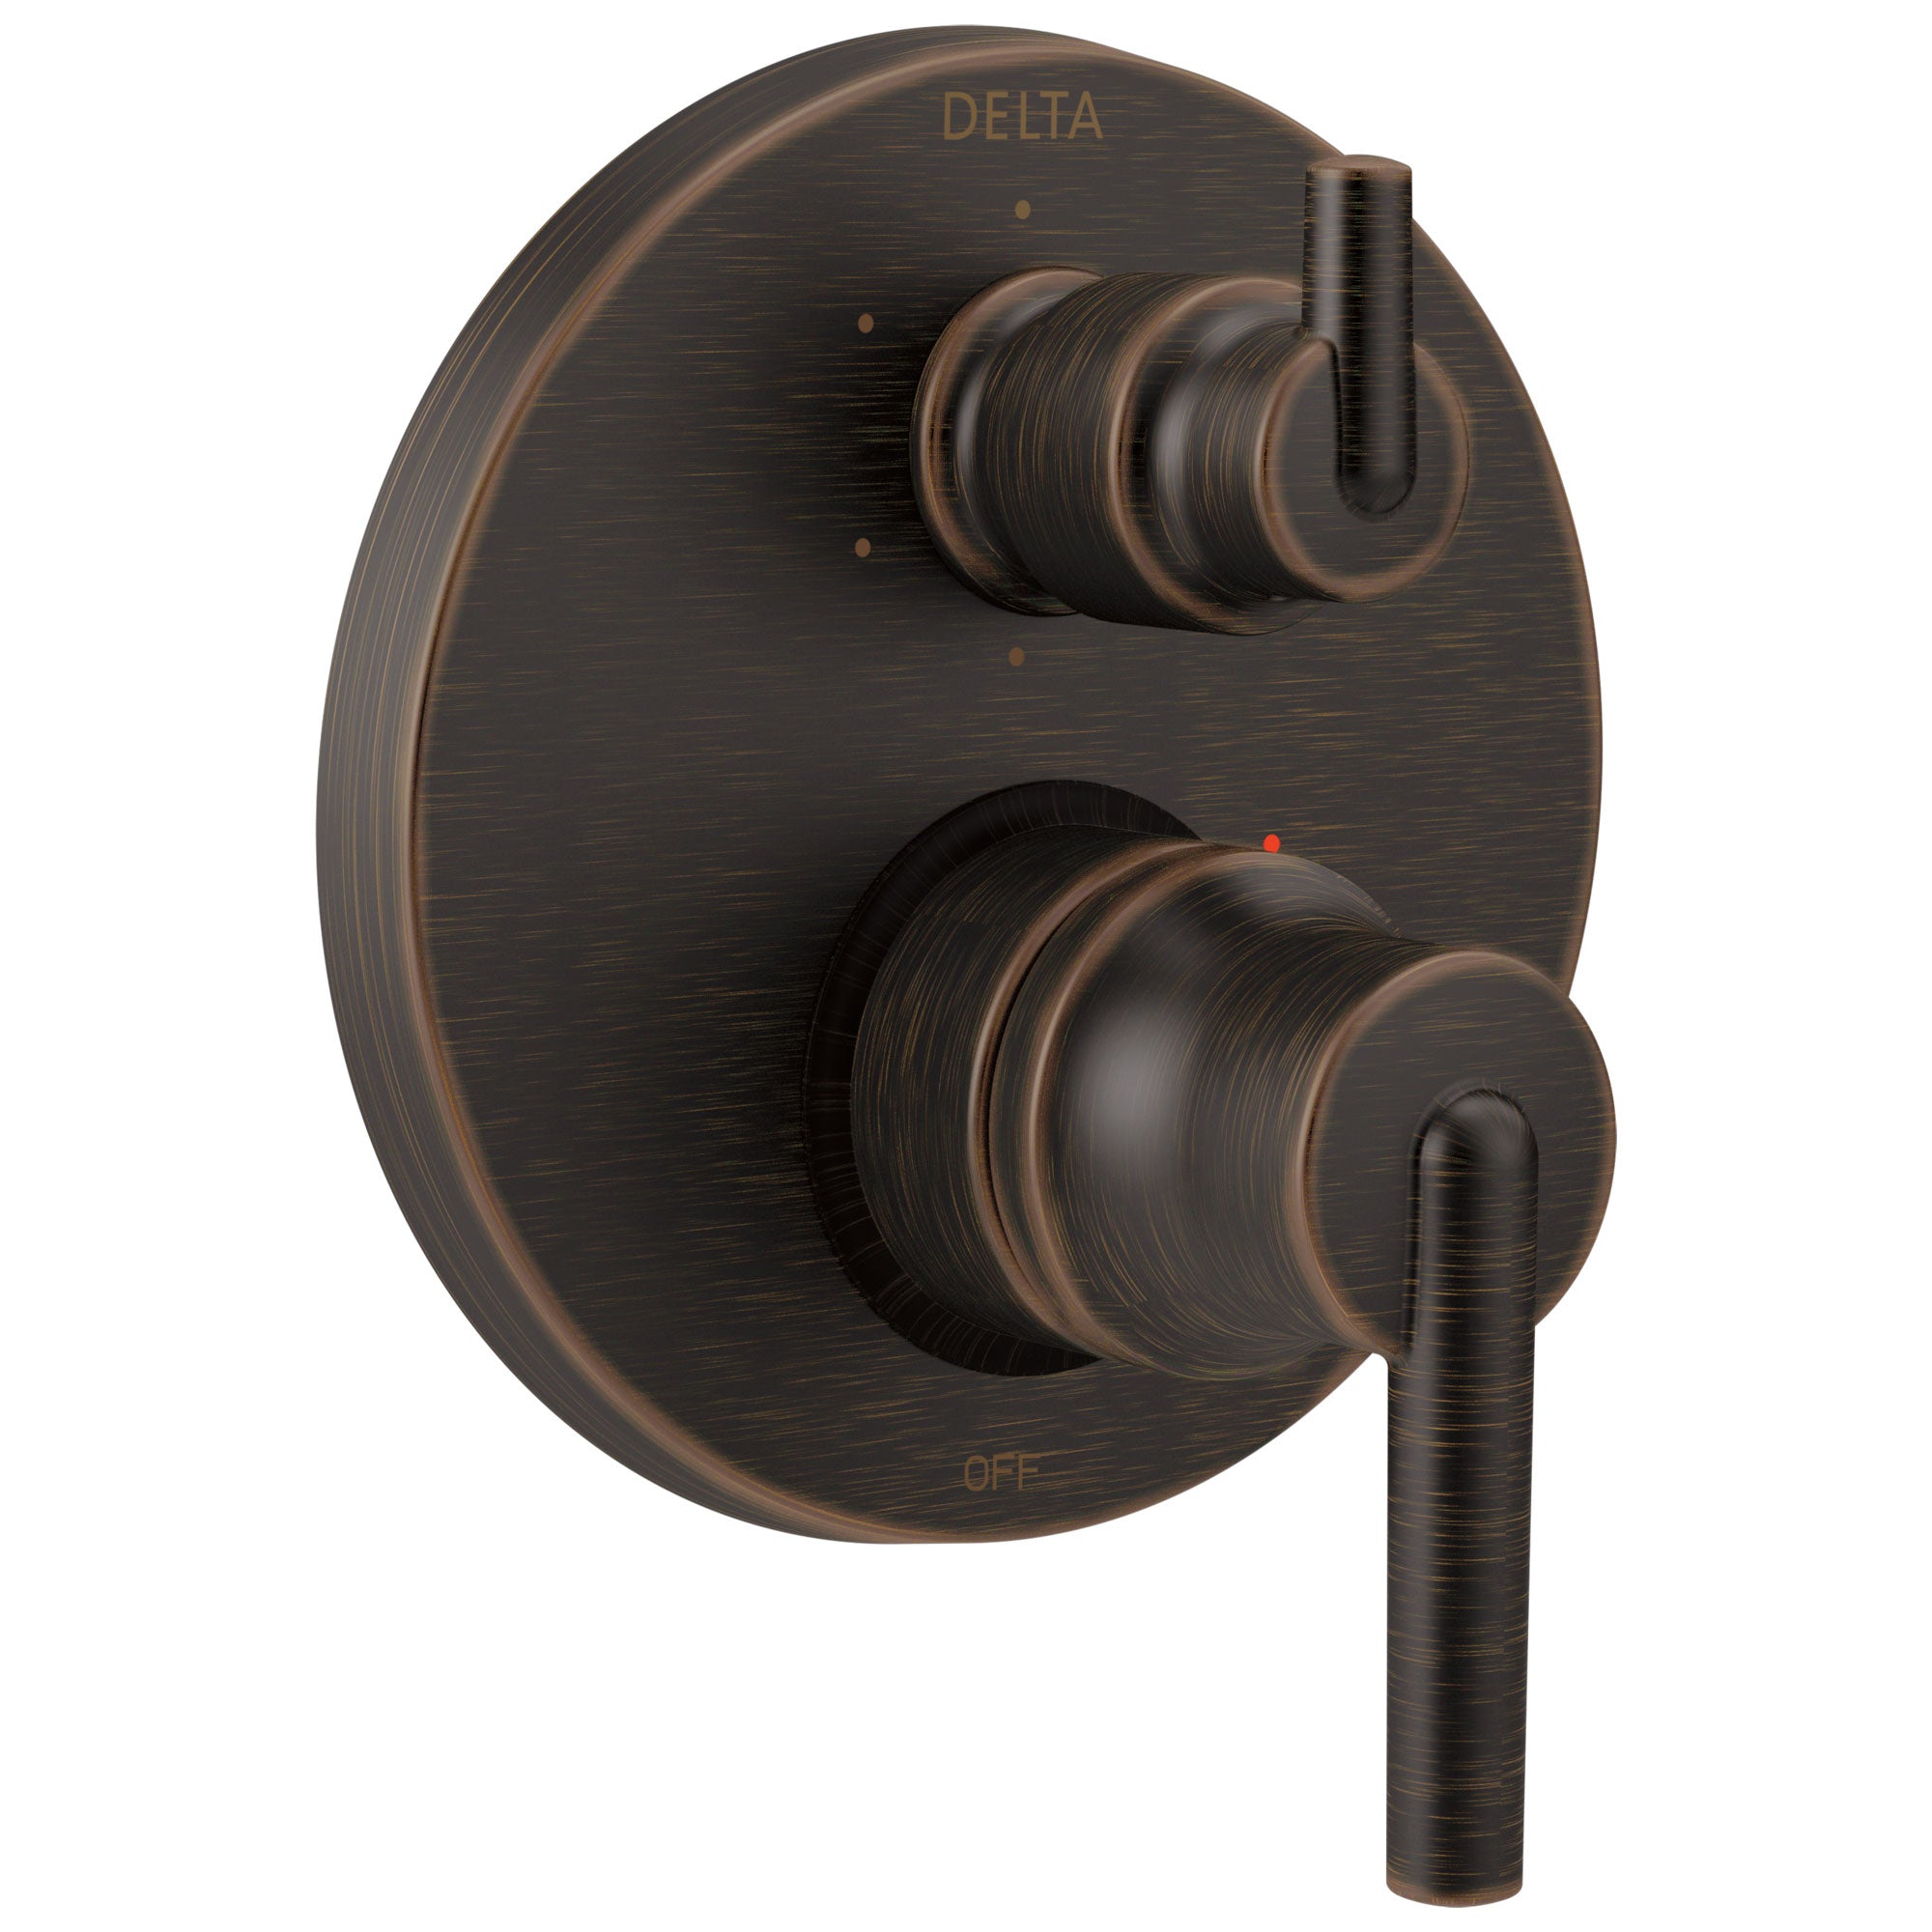 Delta Trinsic Collection Venetian Bronze Monitor 14 Shower Faucet Control Handle with 6-Setting Integrated Diverter Trim (Requires Valve) DT24959RB